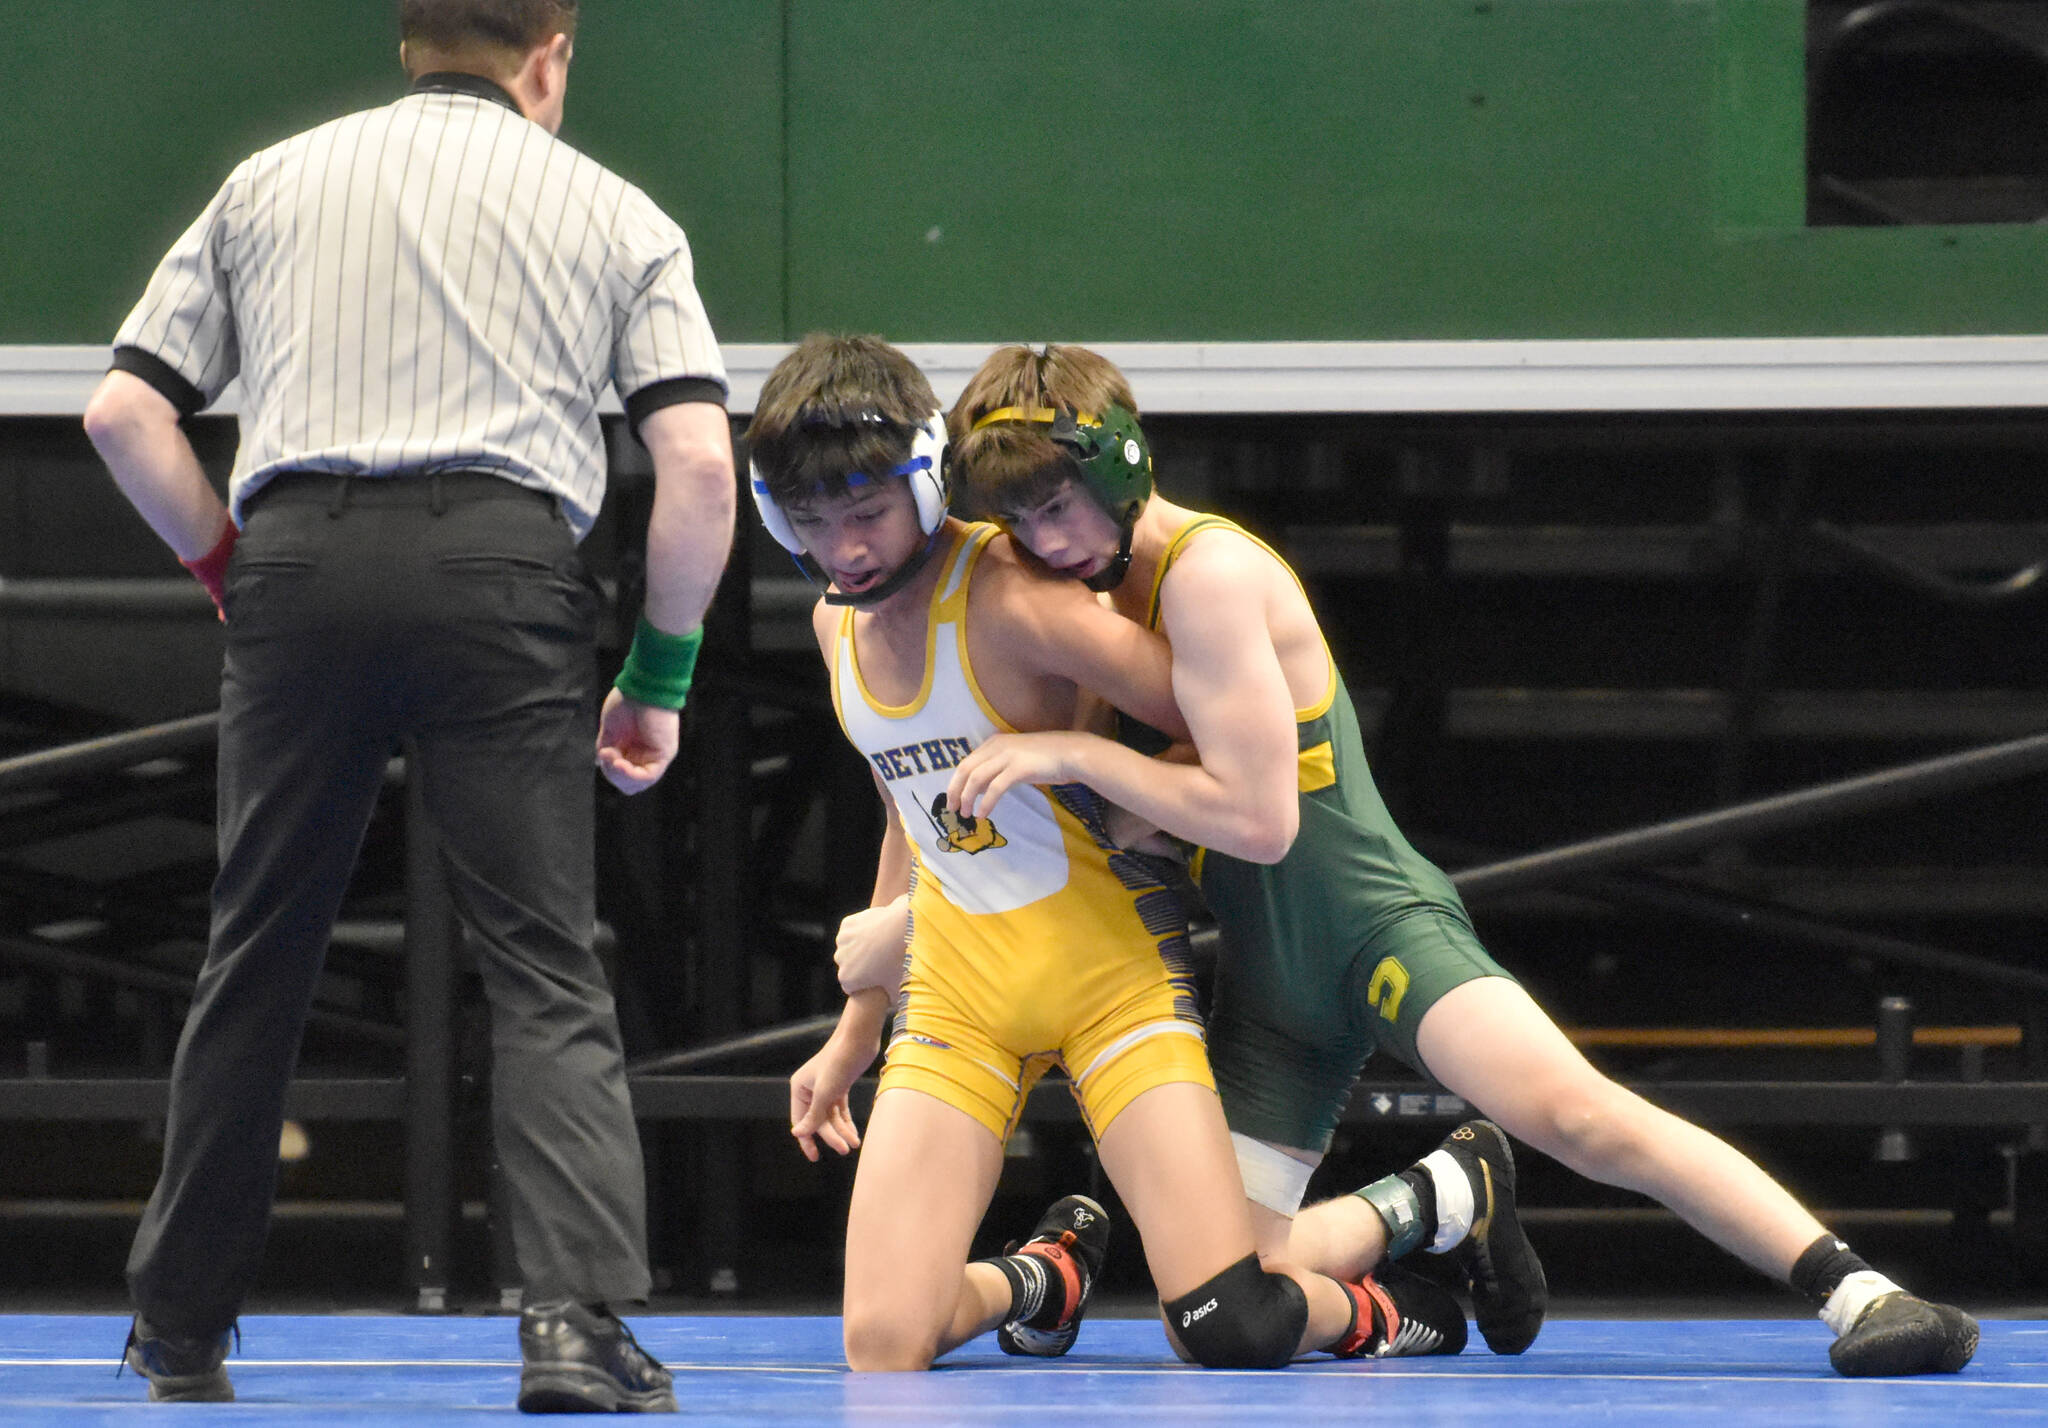 Seward’s Aidan Schilling defeats Bethel’s Alvino Vasquez for the Division II state title at 112 pounds Saturday, Dec. 18, 2022, at the state wrestling tournament at the Alaska Airlines Center in Anchorage, Alaska. (Photo by Jeff Helminiak/Peninsula Clarion)